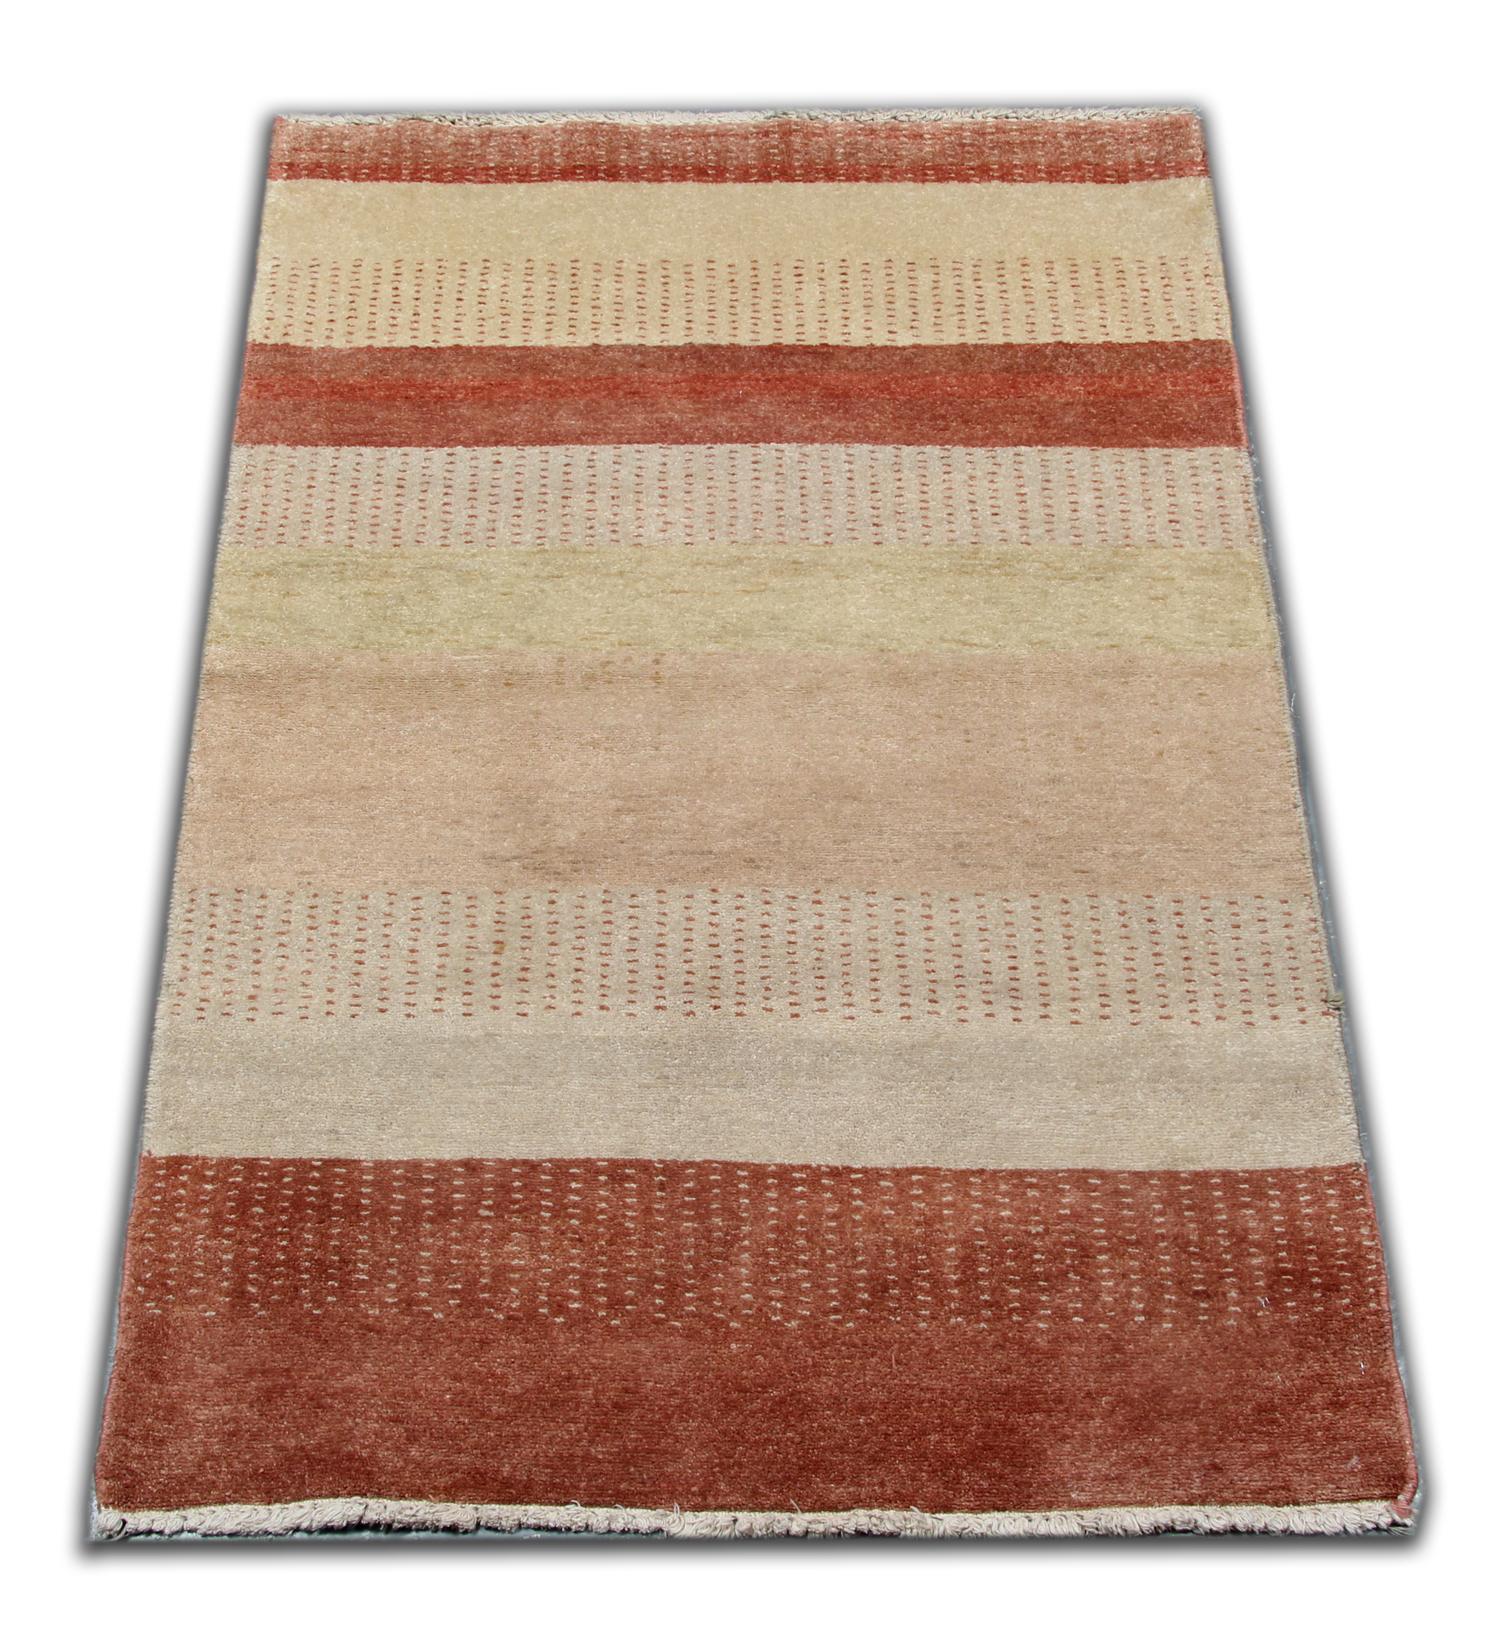 This carpet features a modern striped design with rich colors of burnt orange and beige, this modern rug gives a subtle uplift to any room. Featuring a beautiful Minimalist design and stylish colors this contemporary carpet will add a touch of